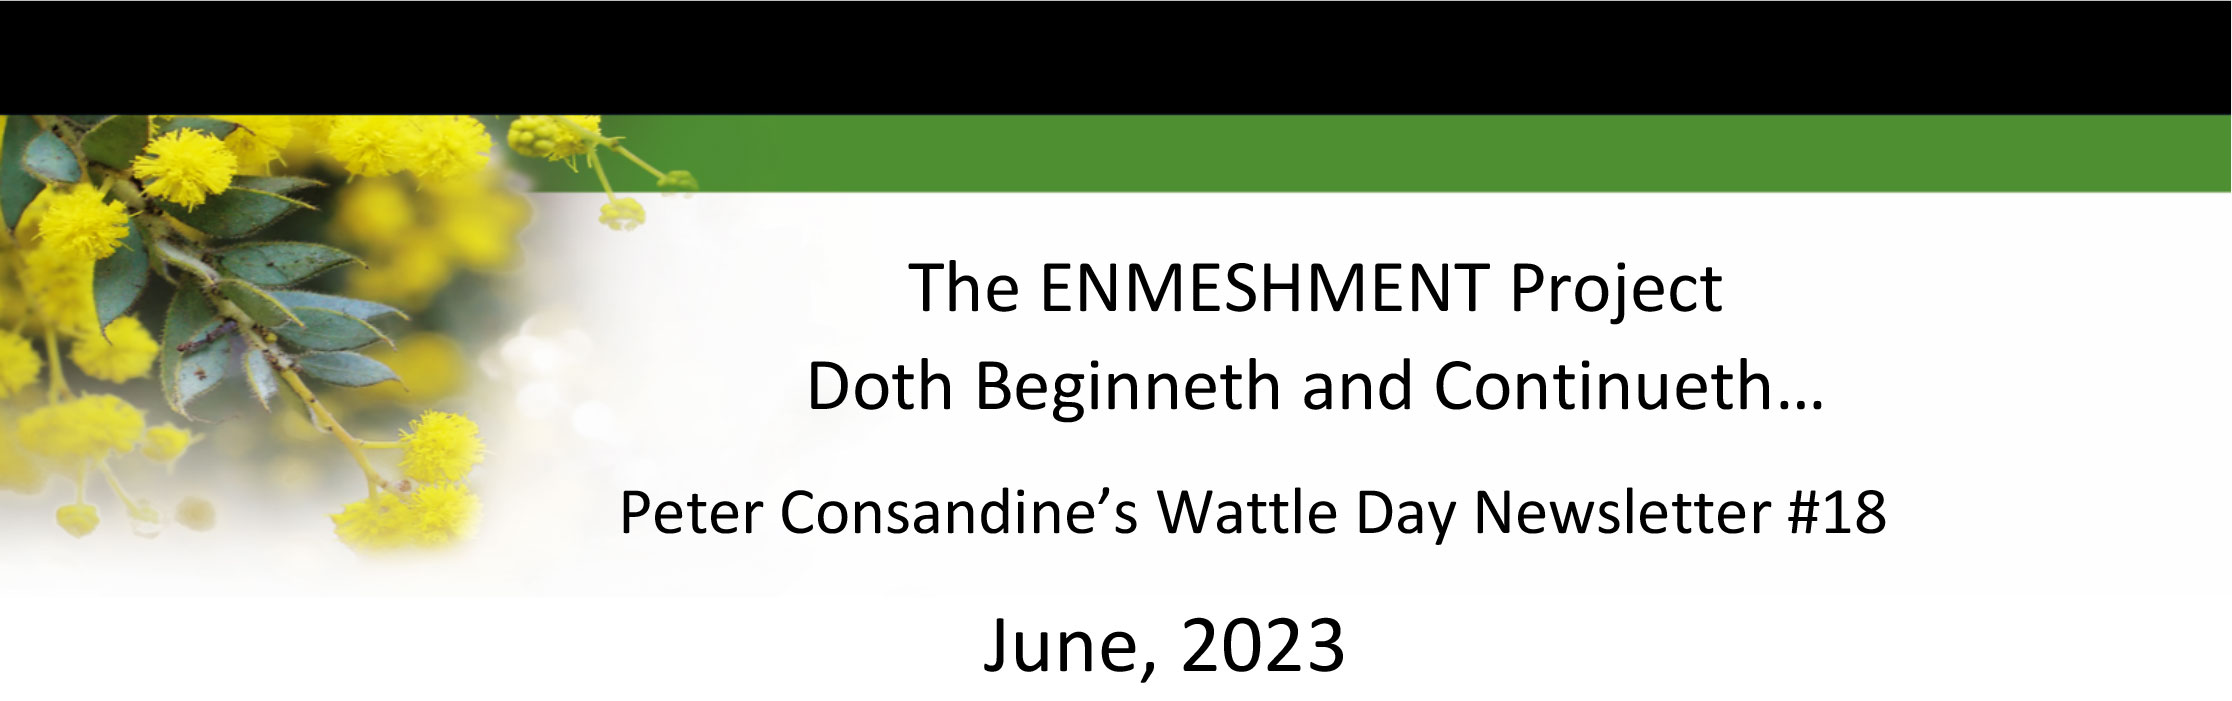 The Enmeshment Project Wattle Day Newsletter No 18 2023